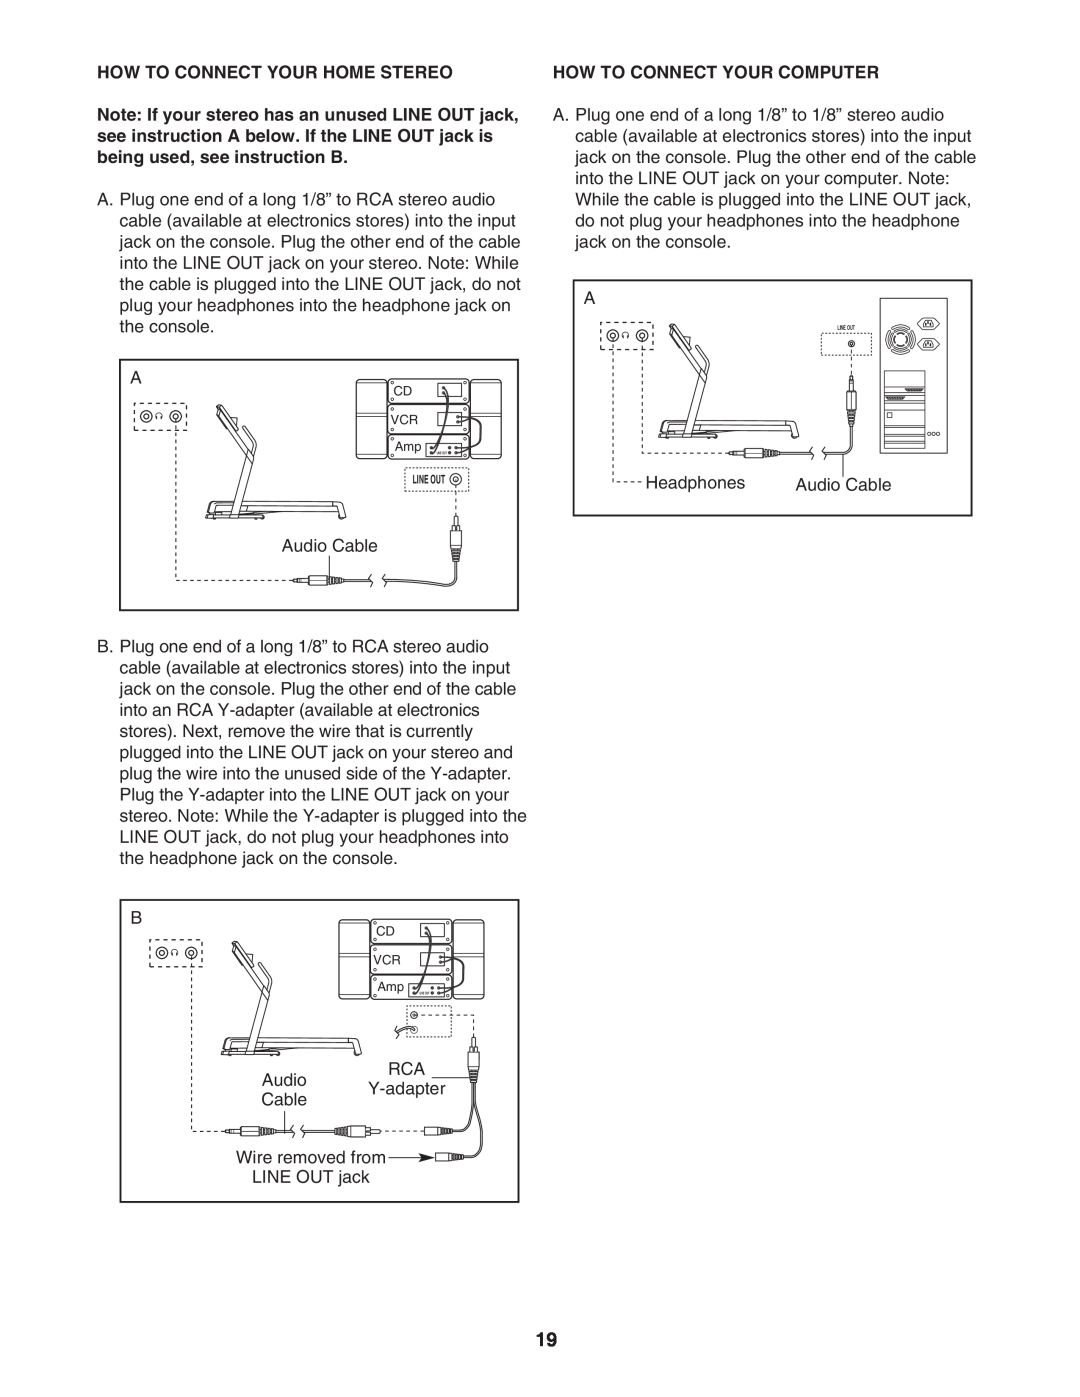 NordicTrack NTL1095.3 user manual How To Connect Your Home Stereo, How To Connect Your Computer, Line Out 